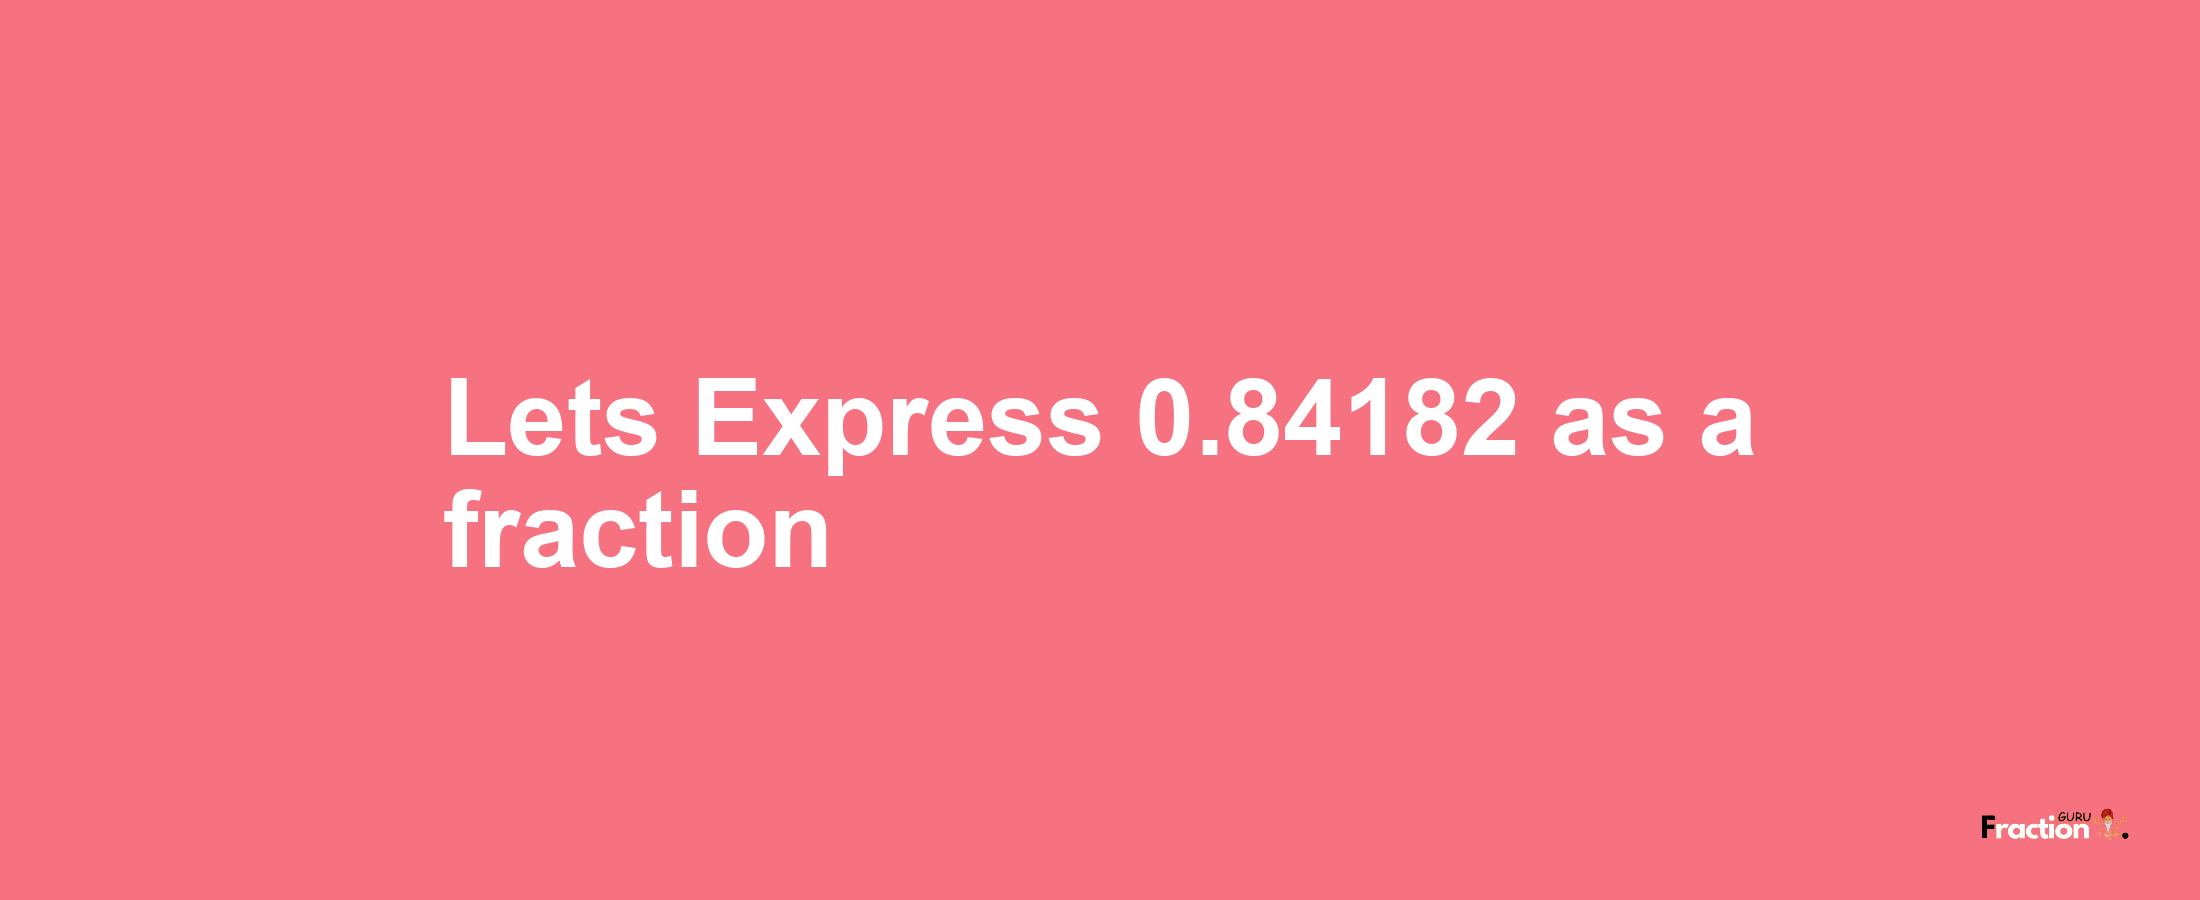 Lets Express 0.84182 as afraction